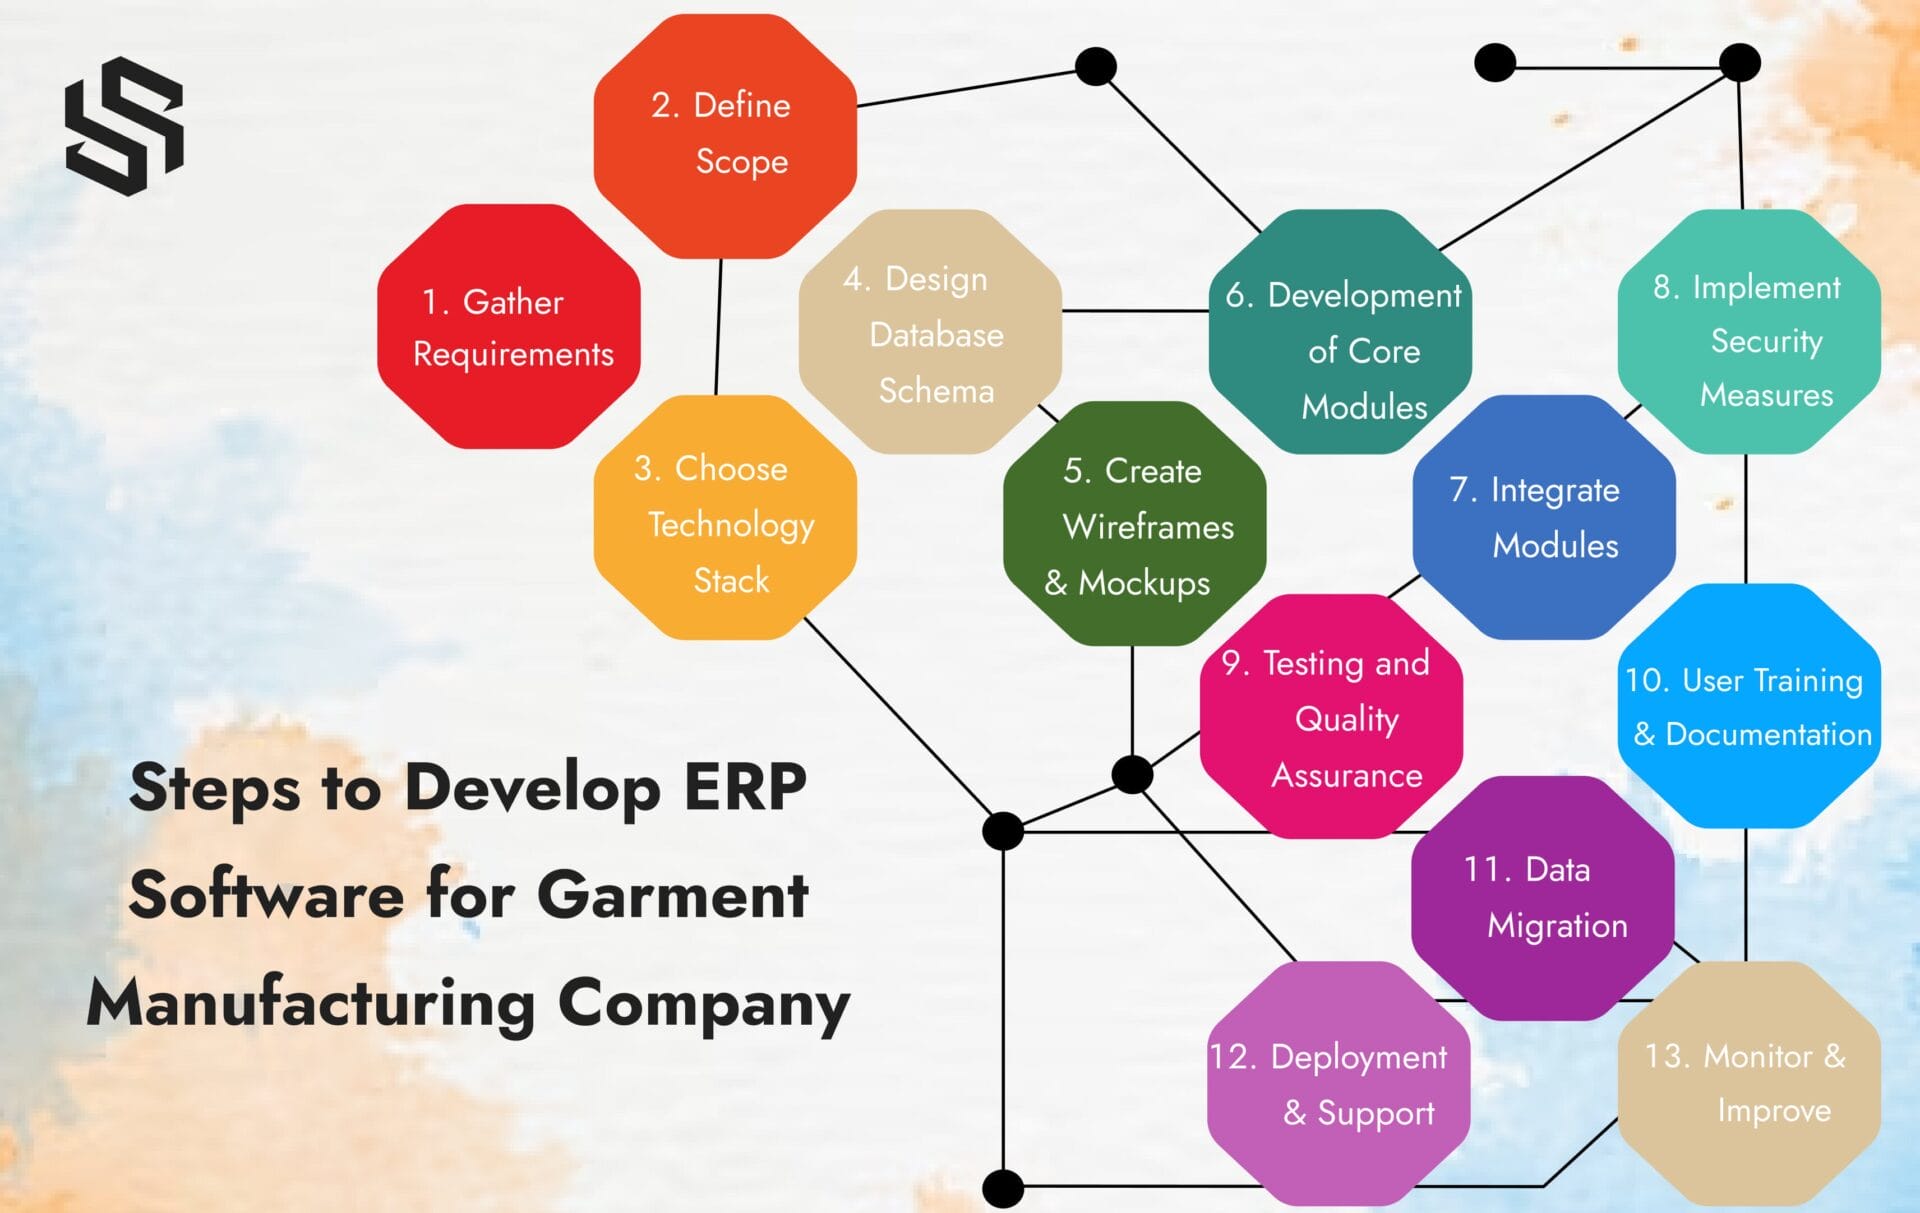 Steps to Develop ERP Software for Garment Manufacturing Business